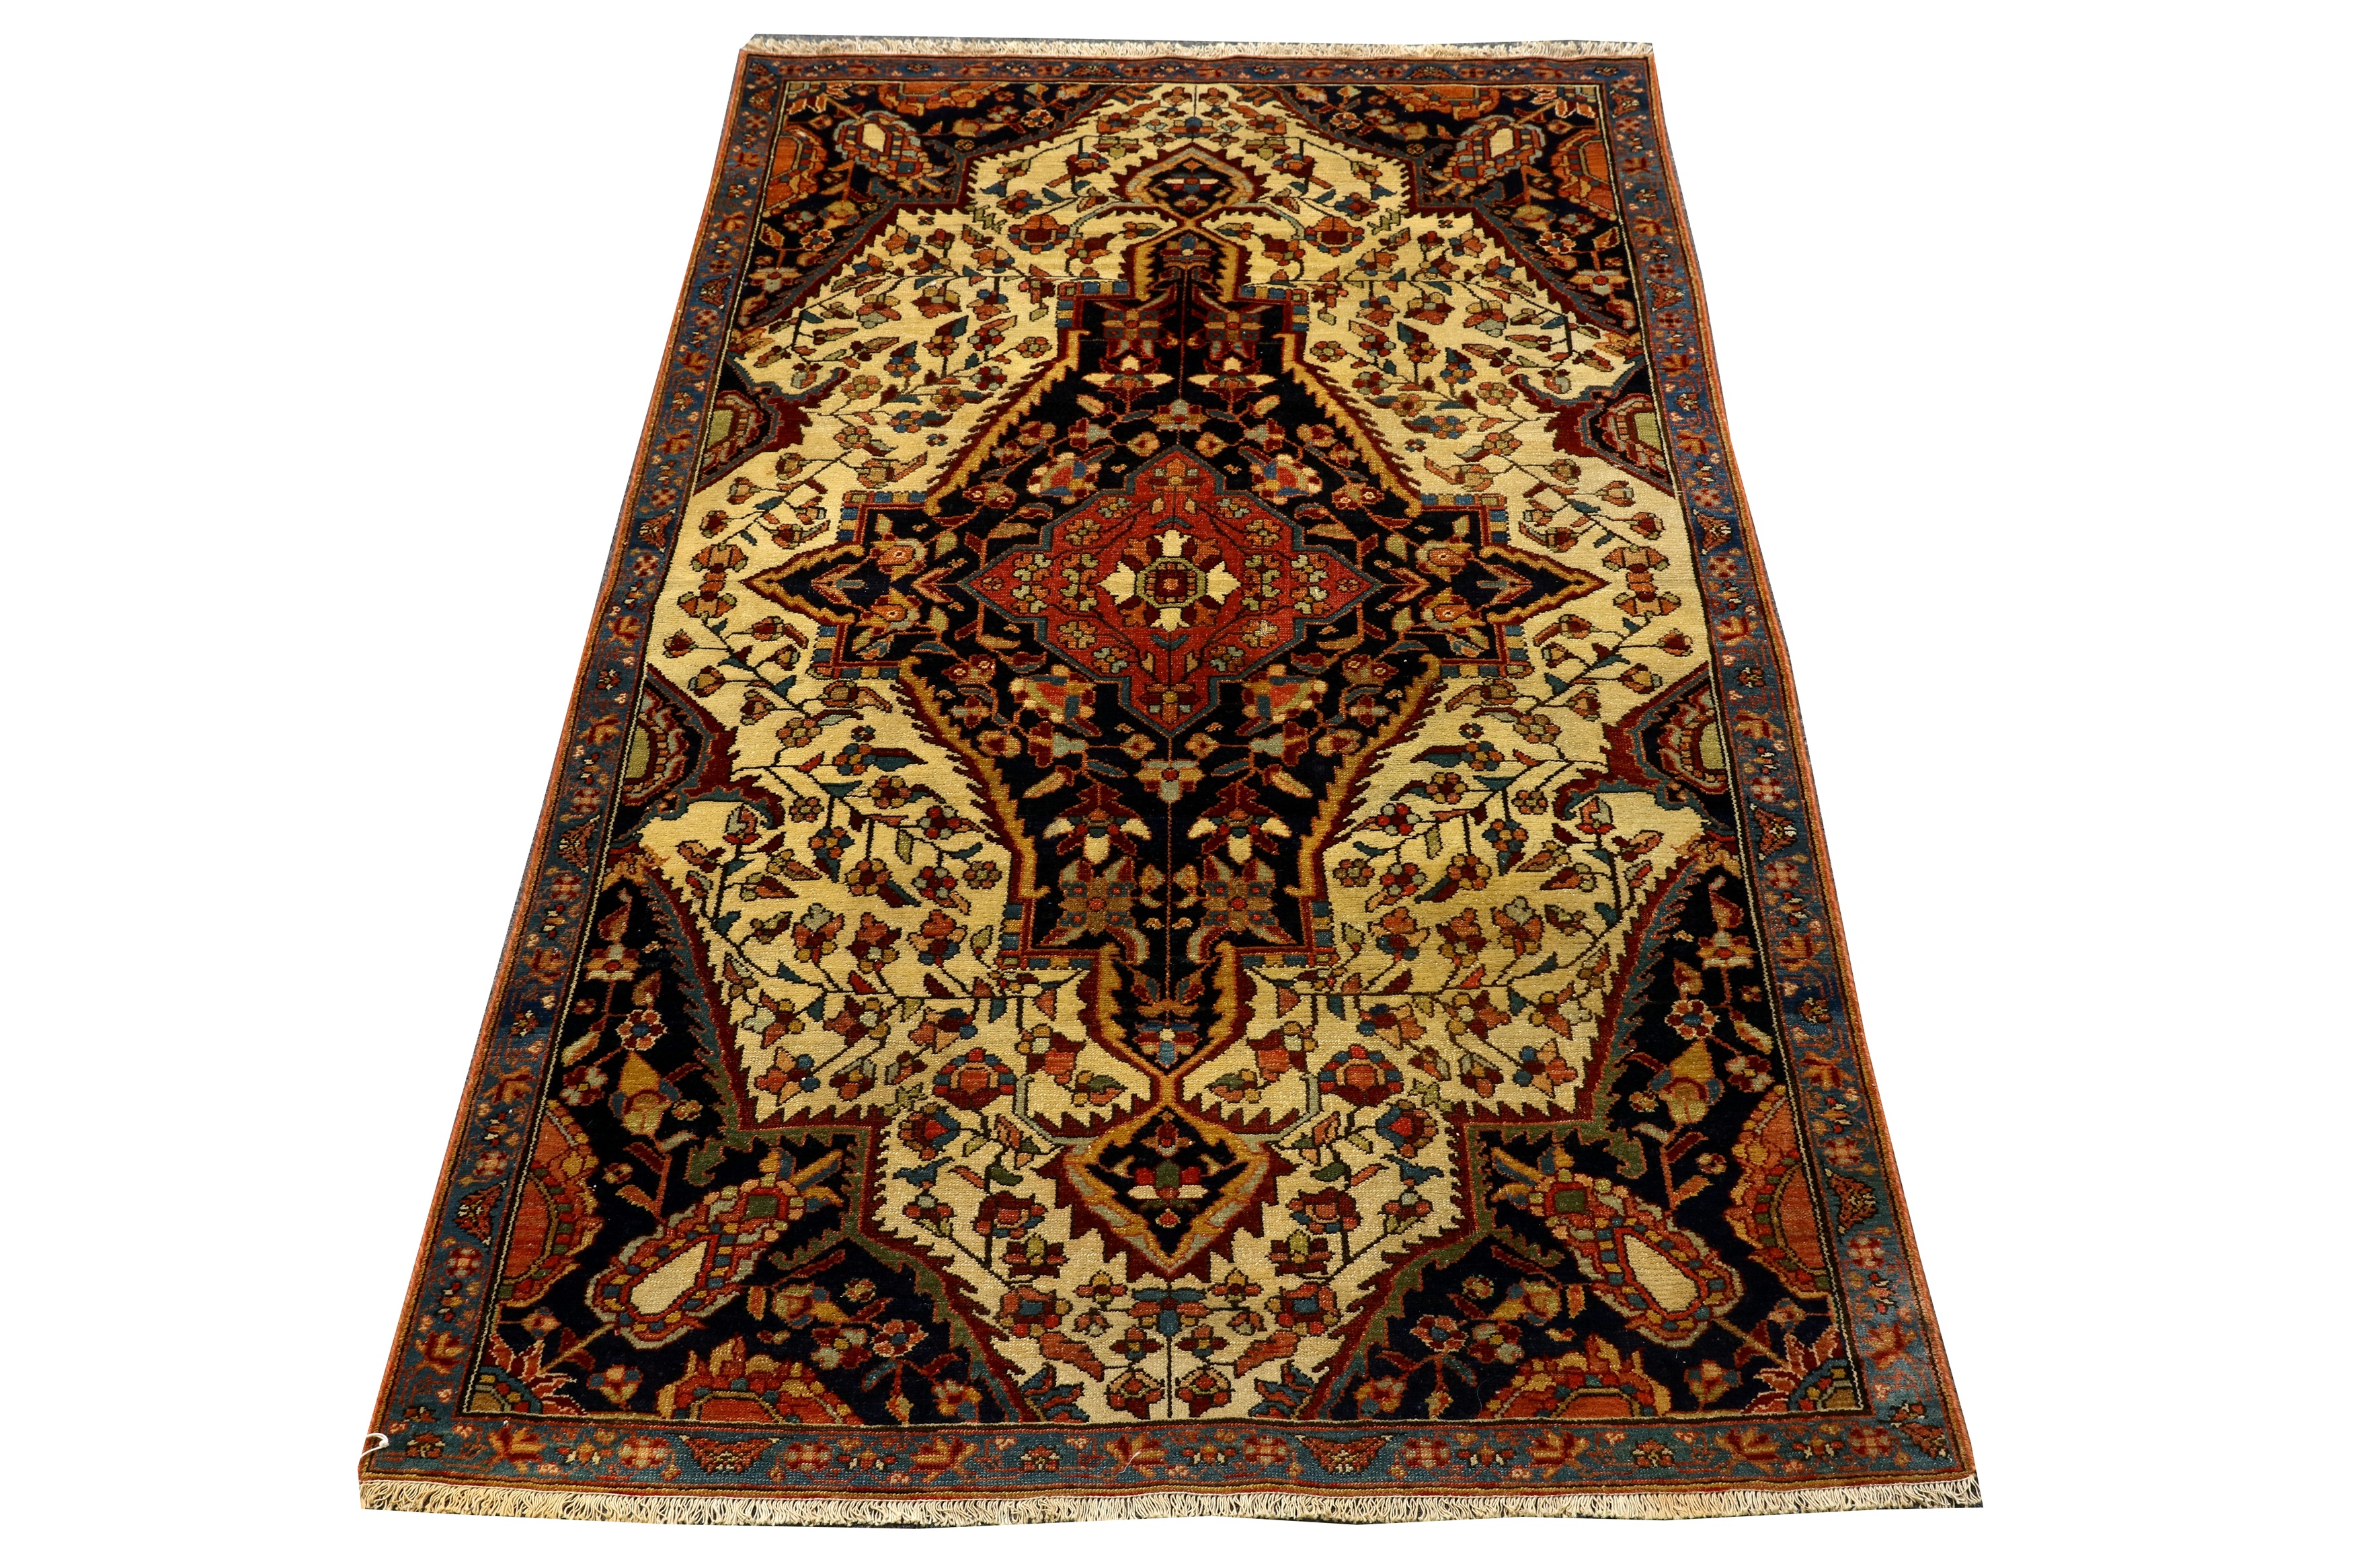 MISHAN MALAYER RUG, WEST PERSIA - Image 2 of 7